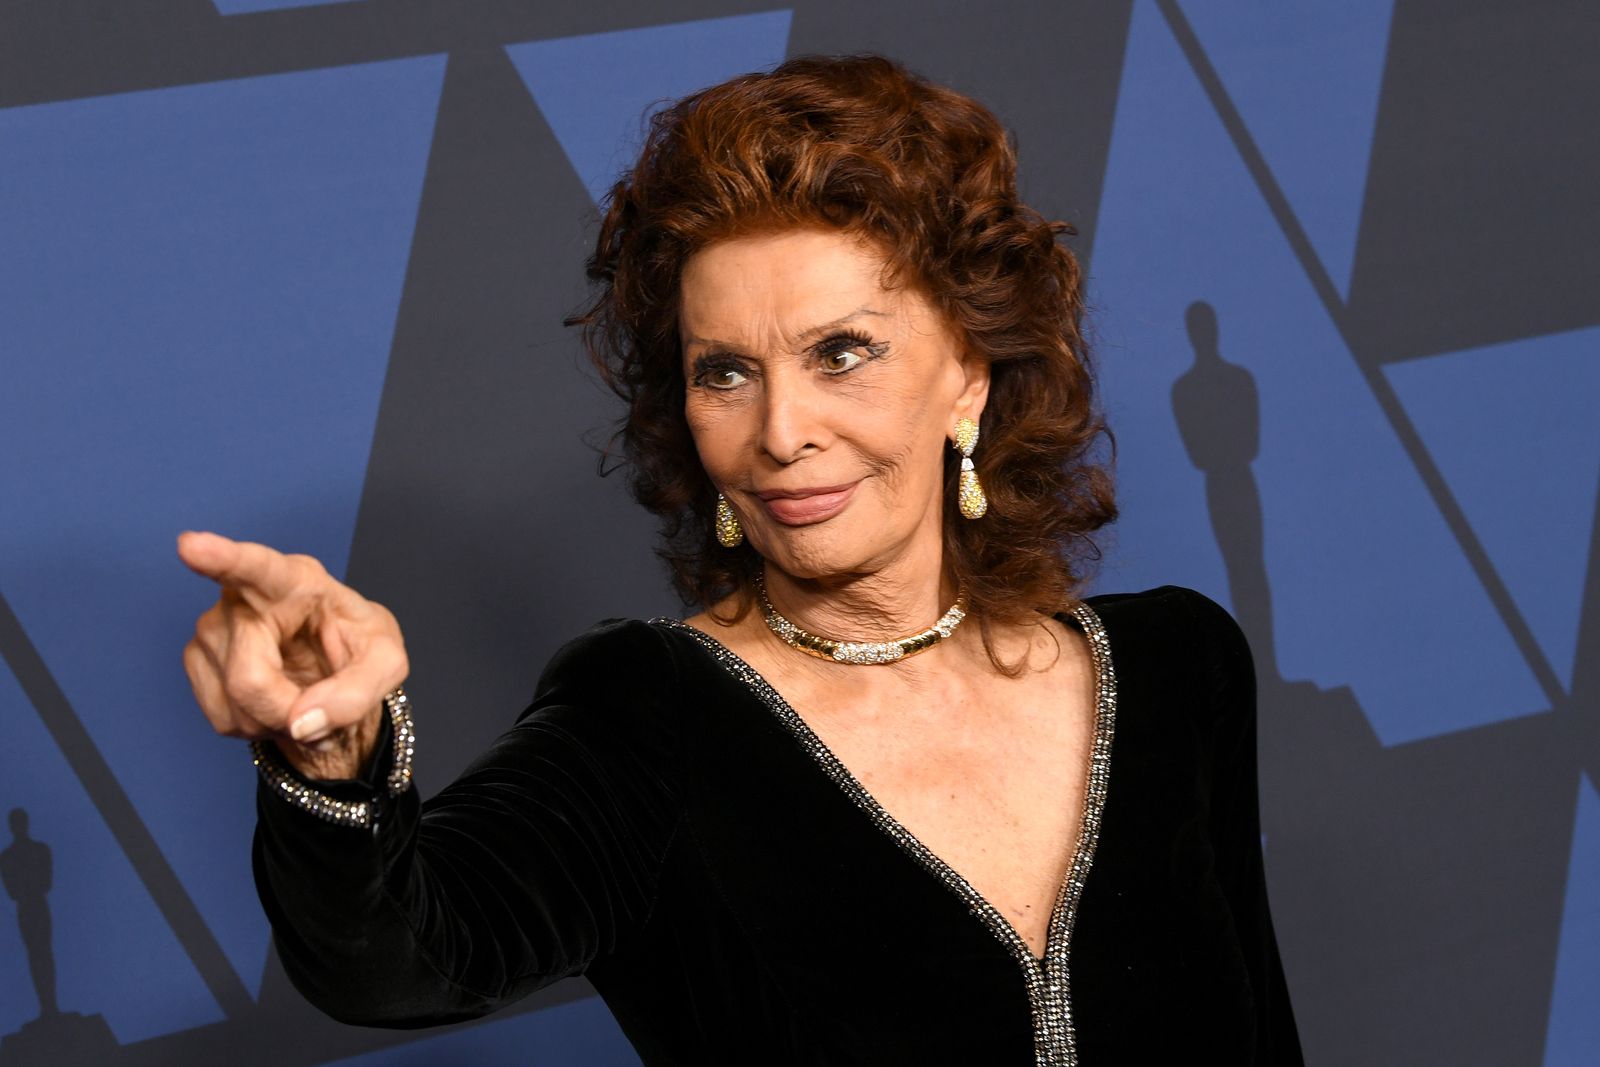 Sophia Loren at the Academy of Motion Picture Arts And Sciences' 11th Annual Governors Awards at The Ray Dolby Ballroom at Hollywood & Highland Center on October 27, 2019 | Photo: Getty Images